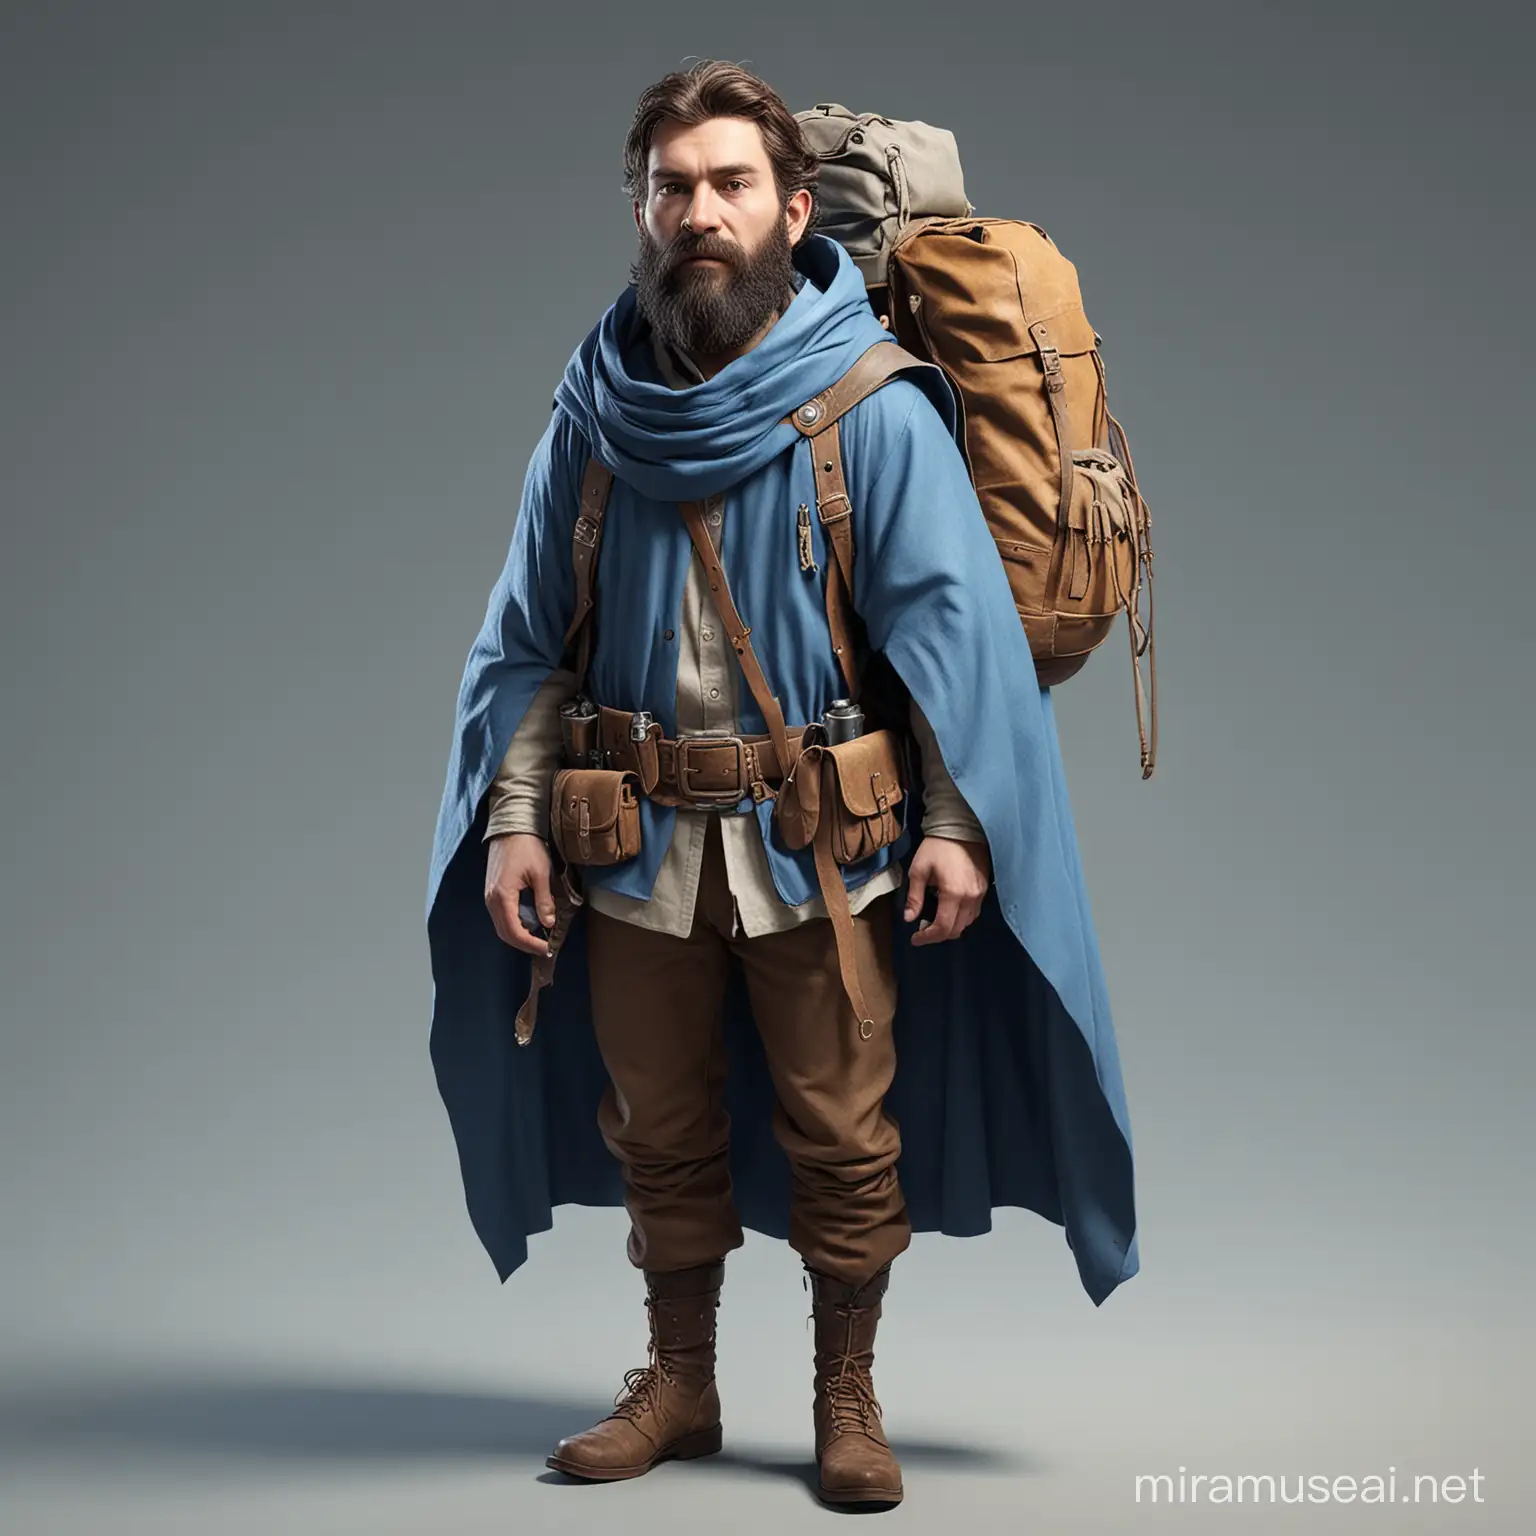 Character concept, mountain man, blue cape around head, bag on back. Camera view is high top down 45-60 degrees